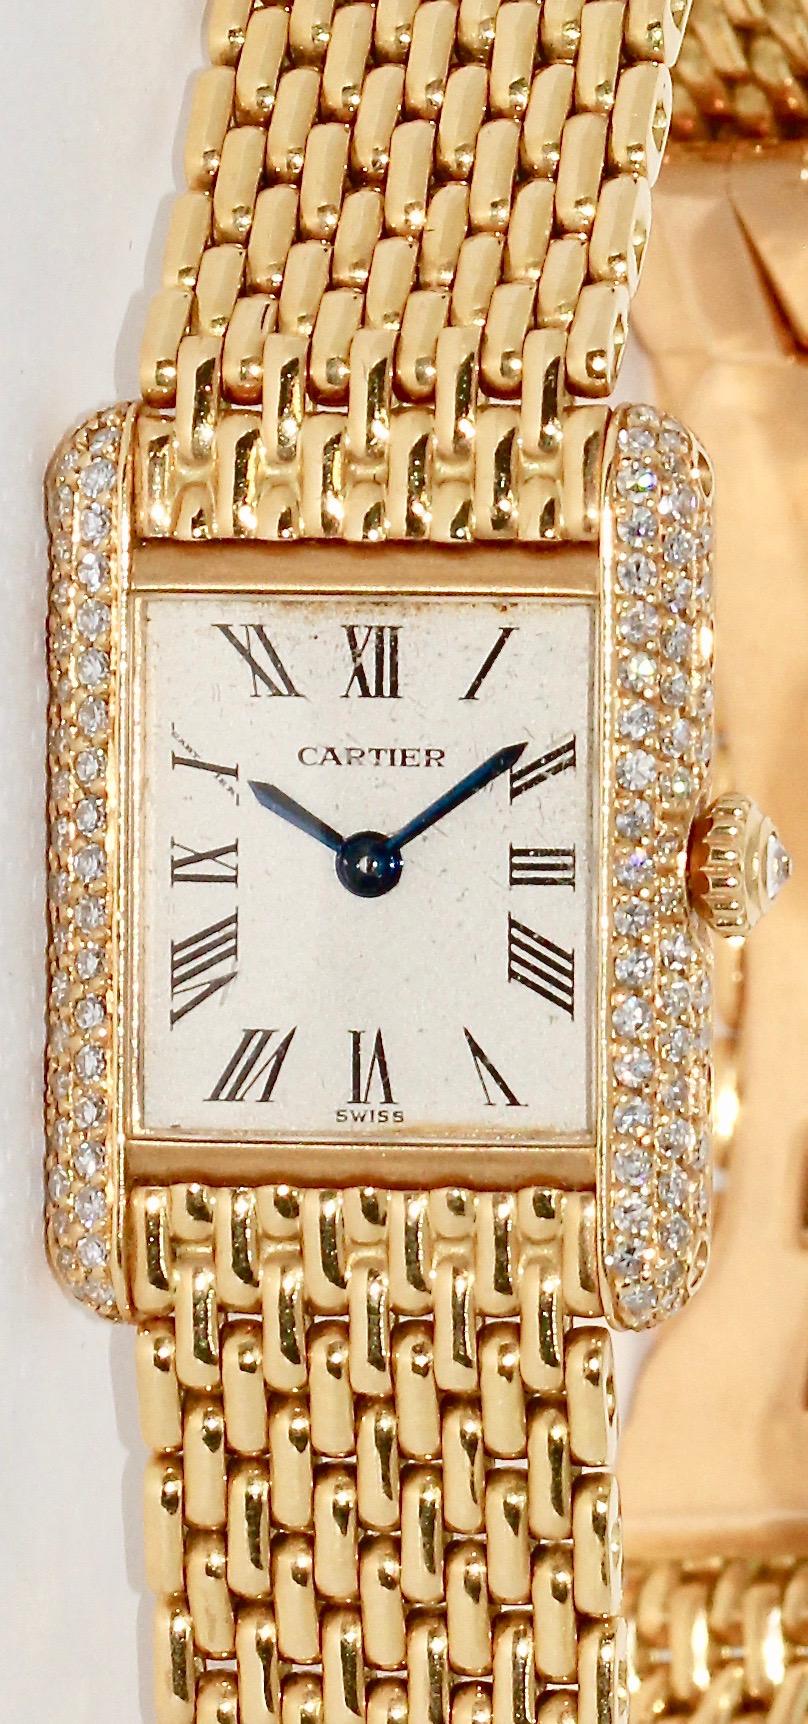 Rare Cartier Tank Louis Ladies Wrist Watch. 18 Karat Gold and Diamonds.

Diamonds, original Cartier.
The watch will be overhauled before shipment! (New battery, cleaning the dial, etc.)

Including certificate of authenticity.